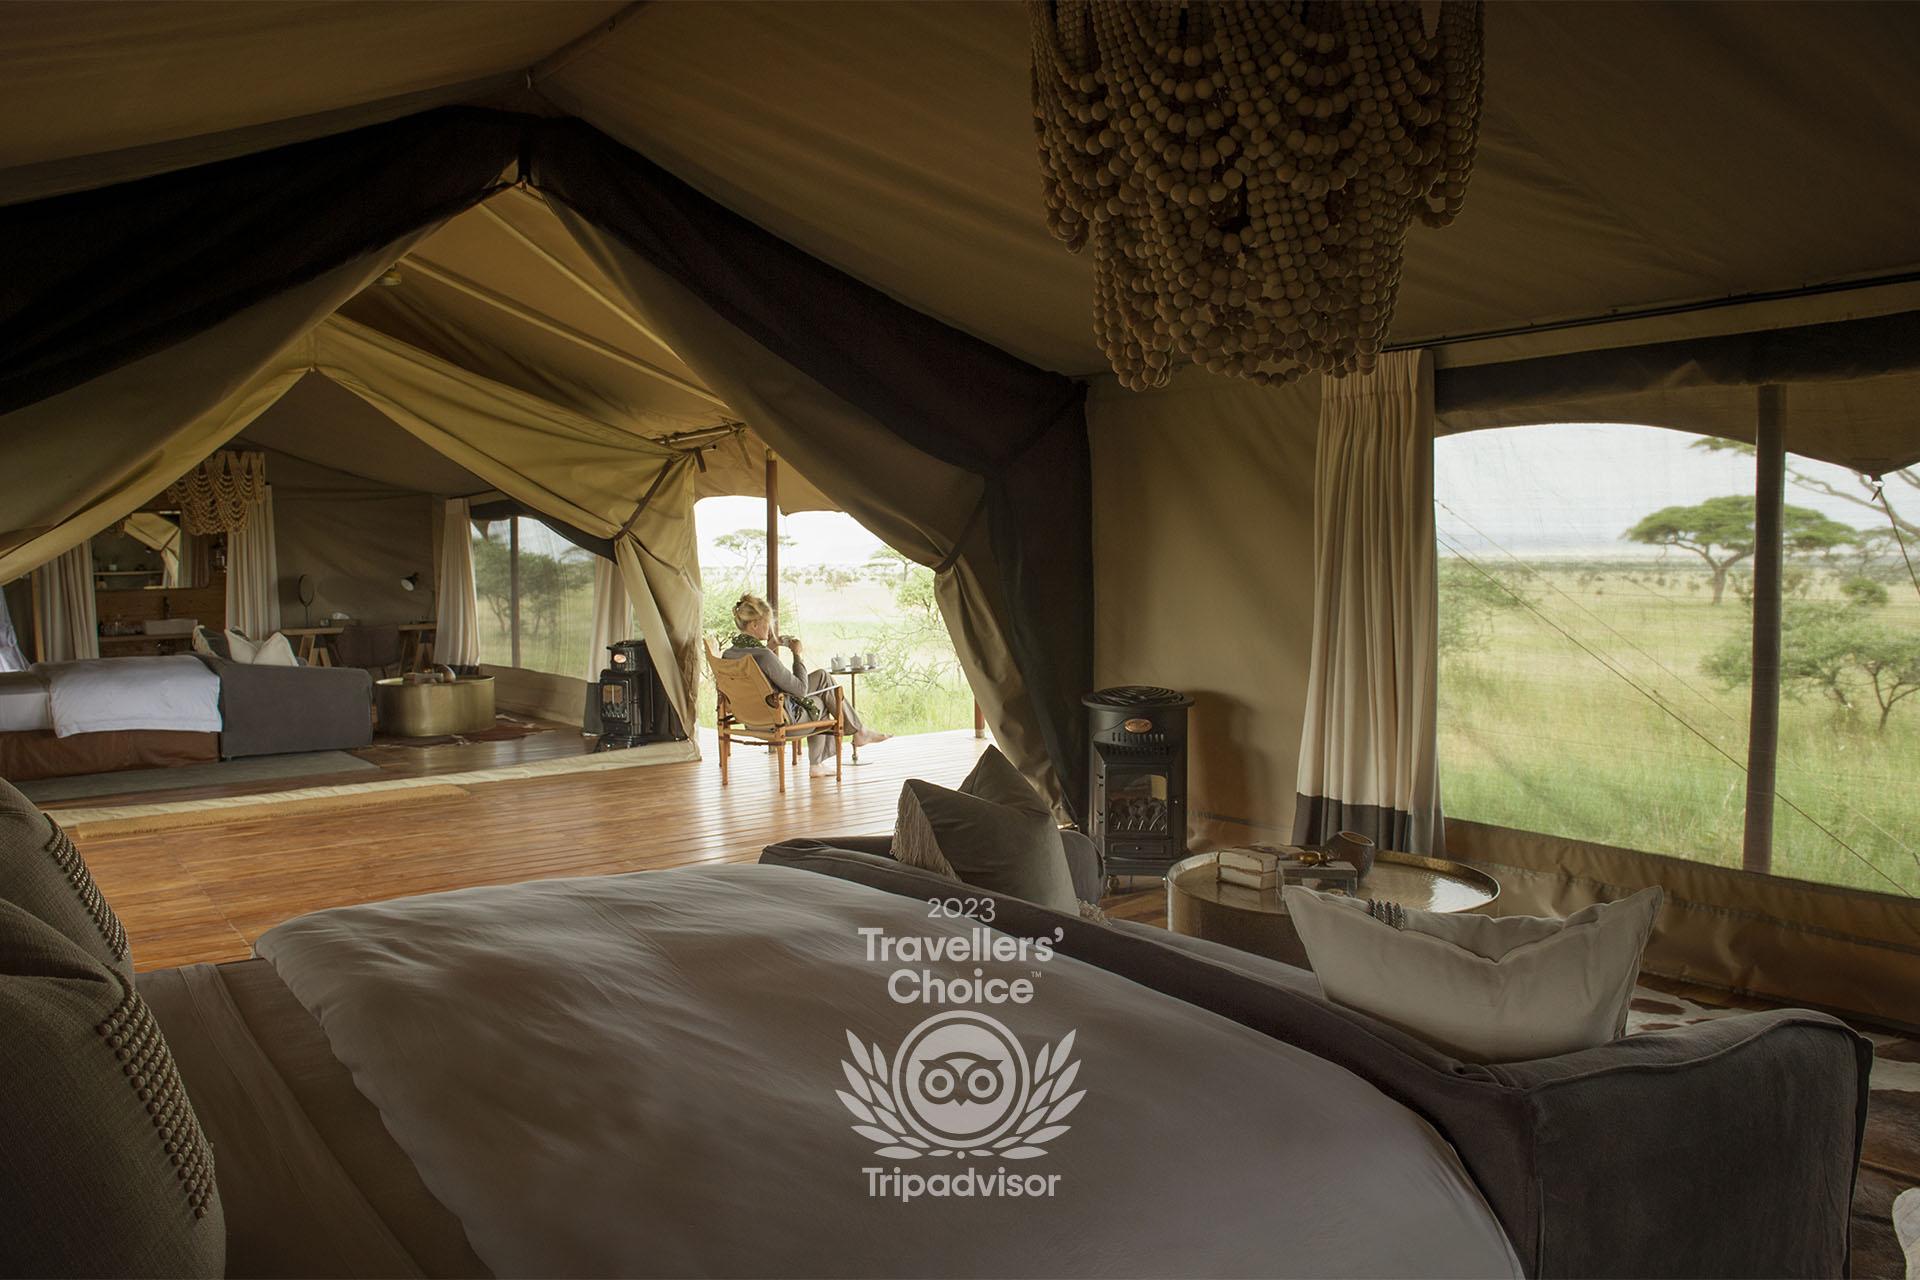 A two-bedroomed family tent will also is available for guests travelling with (small) children. An ensuite bathroom with “his and hers” wash hand basins, large shower and proper flush toilet will complete each guest tent\n